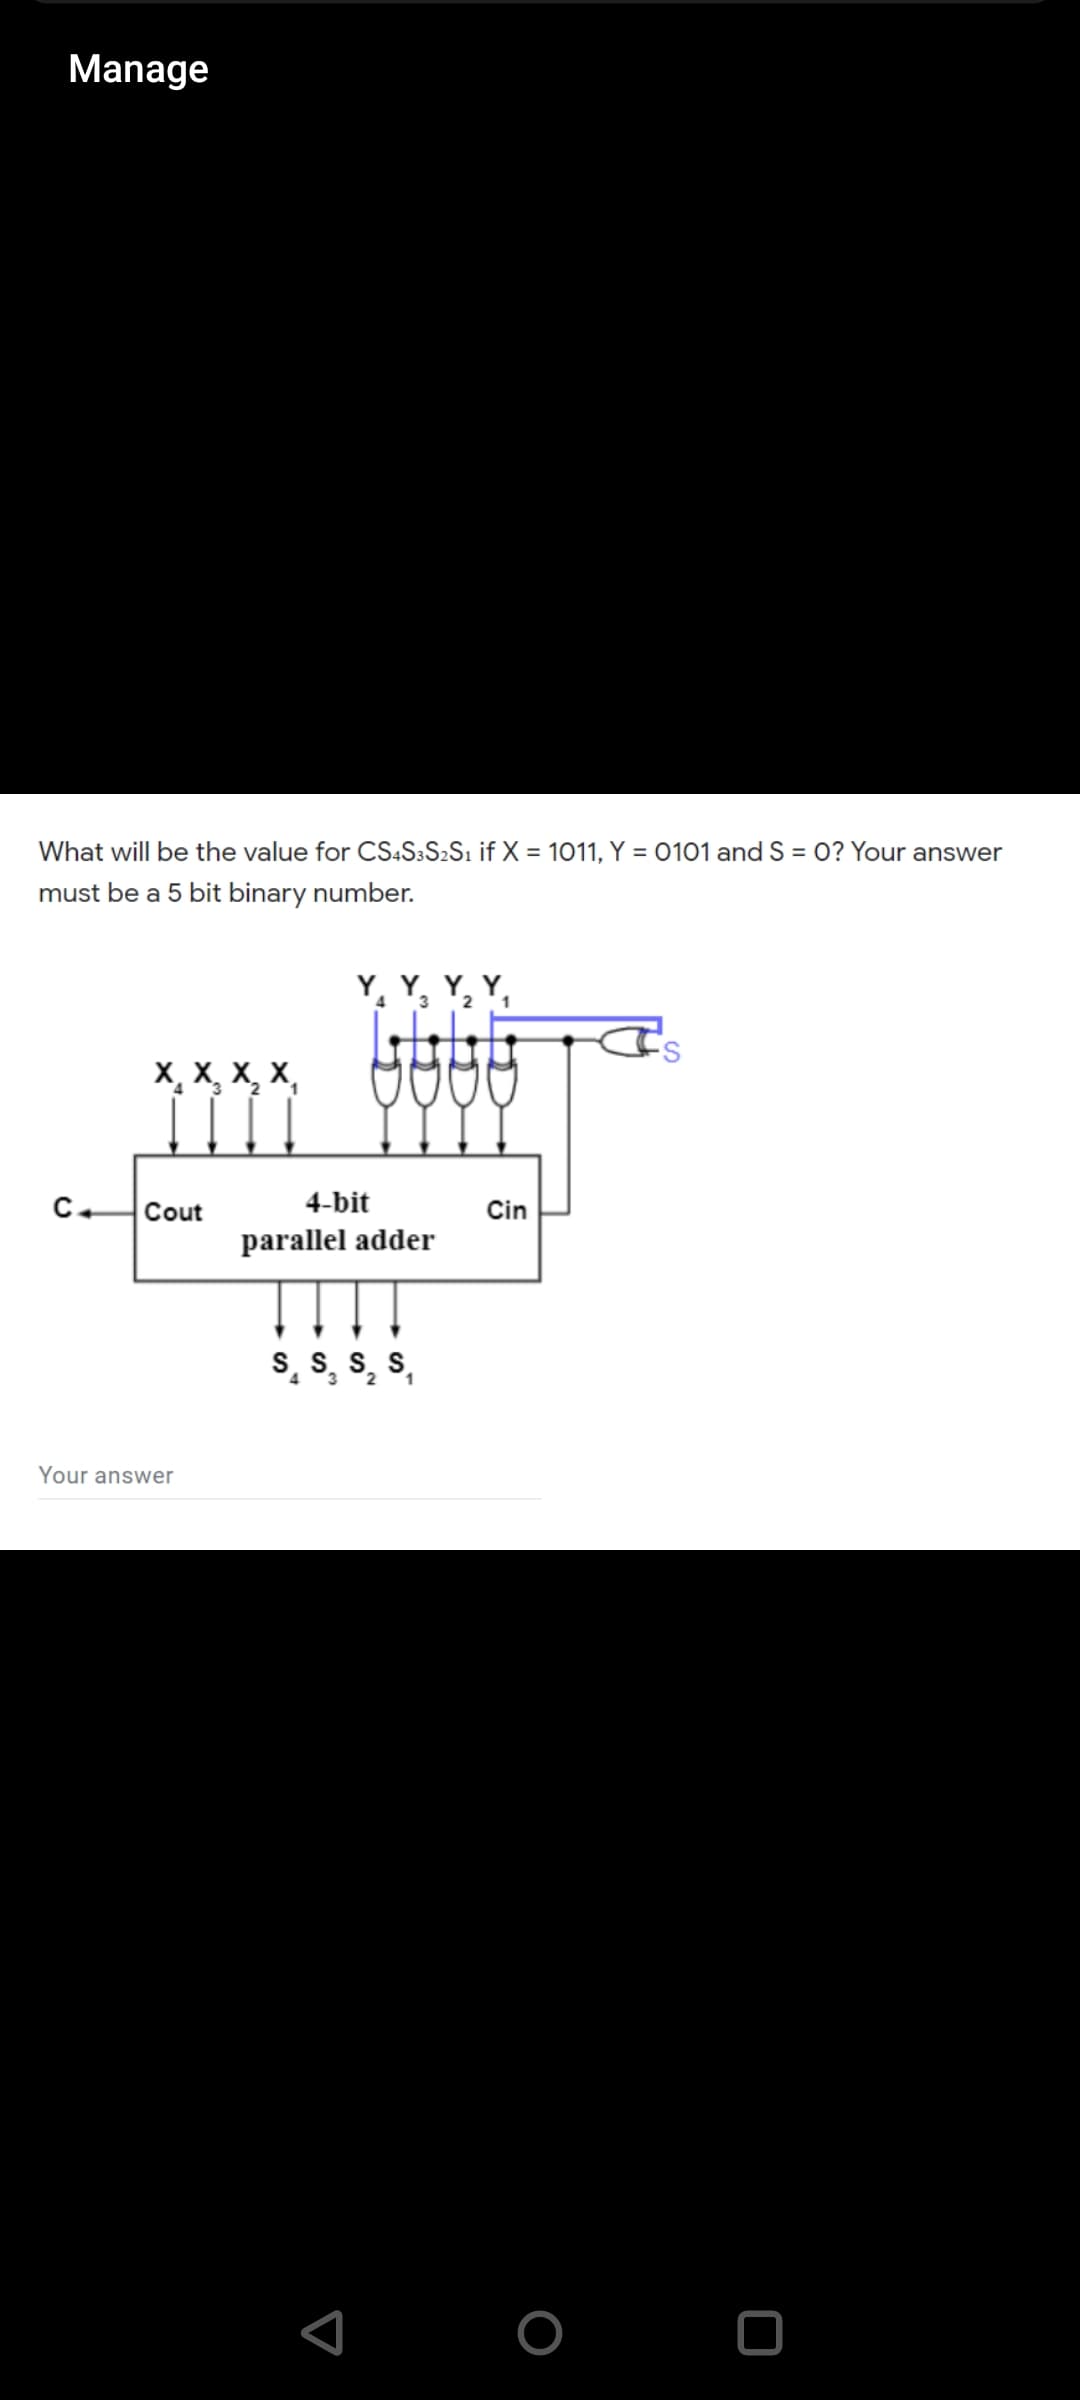 Manage
What will be the value for CS:S3S2S1 if X = 1011, Y = 0101 and S = 0? Your answer
must be a 5 bit binary number.
Y, Y, Y, Y,
3 2
X, X, X, X,
C.
Cout
4-bit
Cin
parallel adder
S. S. S. S
4.
3.
1
Your answer
